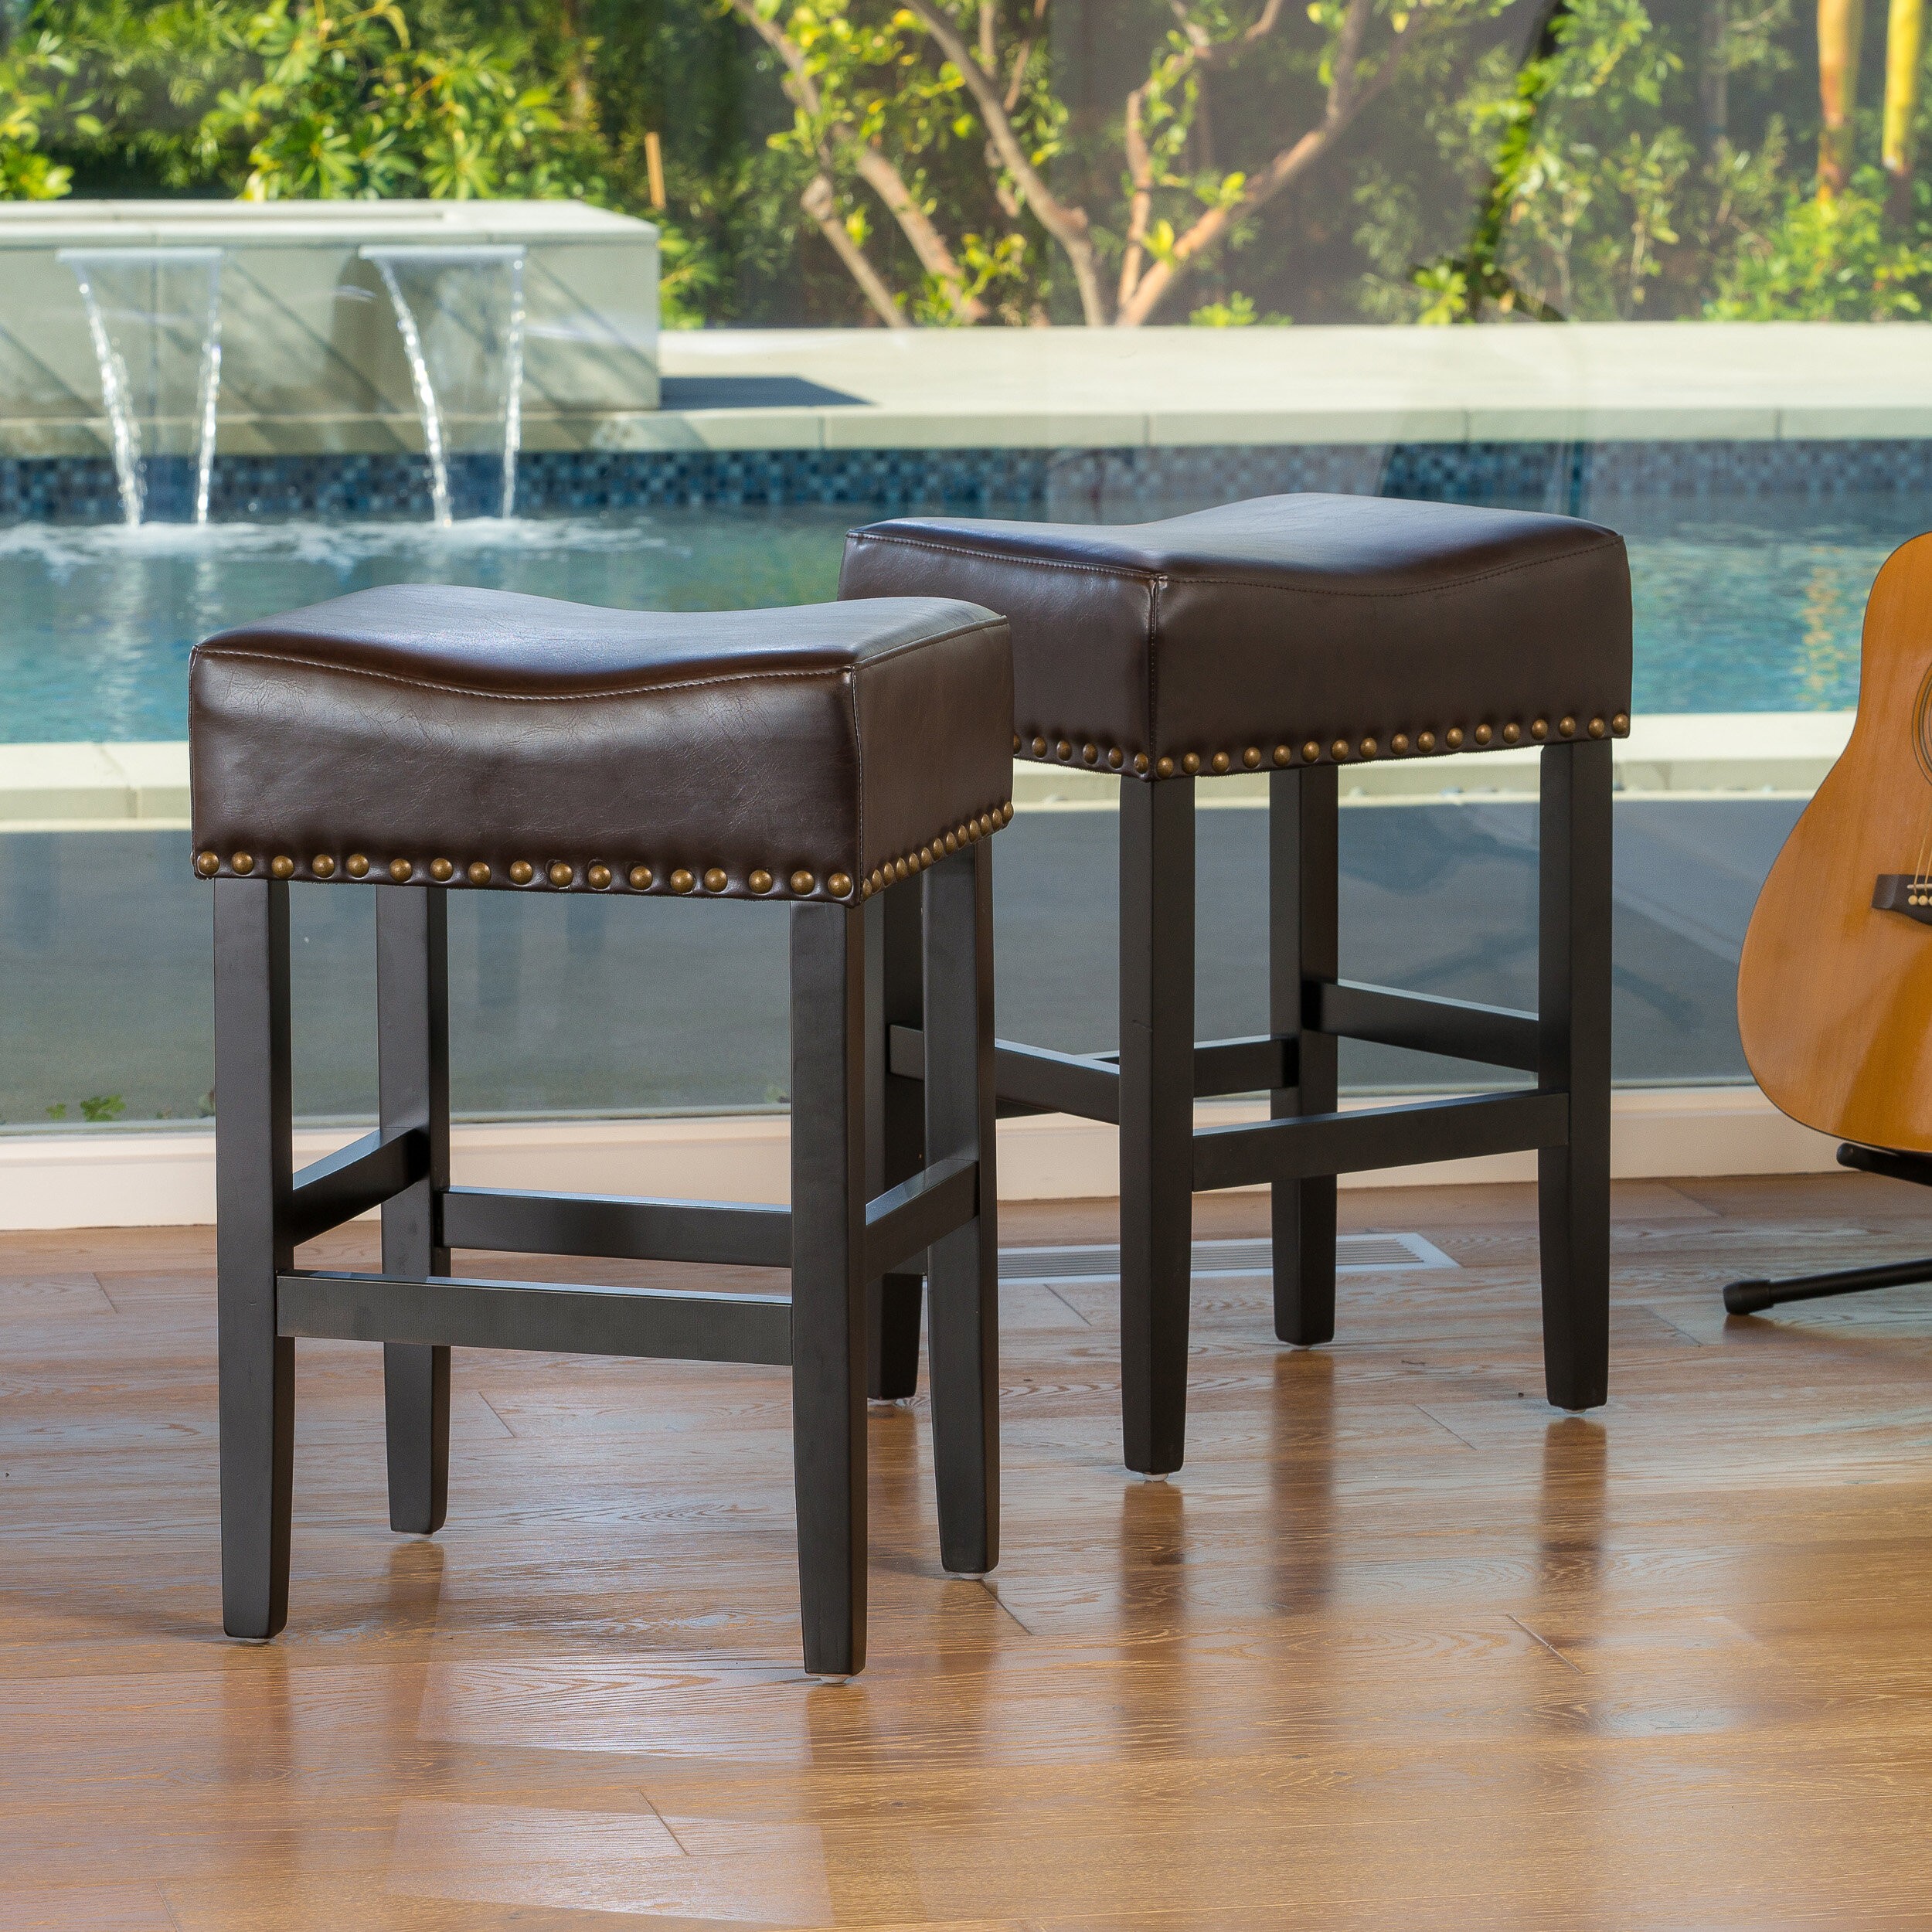 Christopher Knight Home Lisette Backless Black Leather Counter Stool Set Of 2